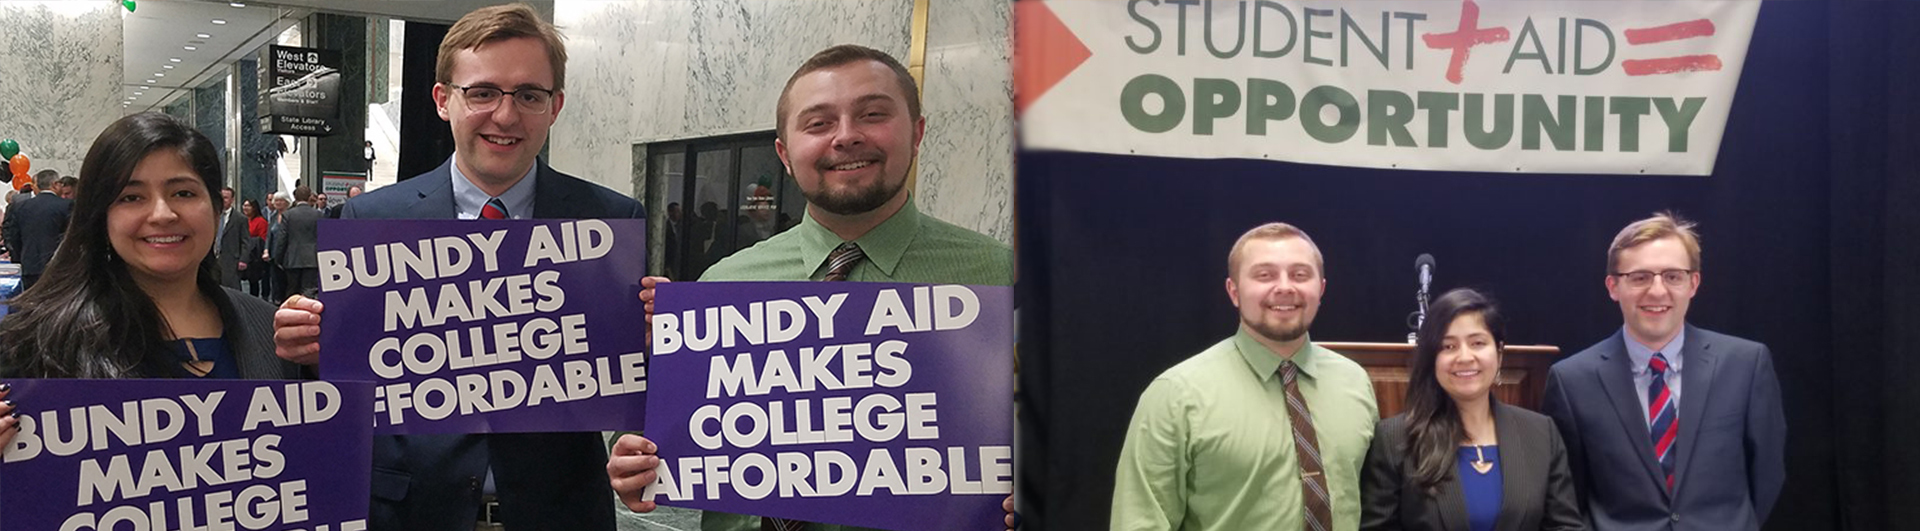 St. Joseph's students went to Albany to support Bundy aid in February 2018.